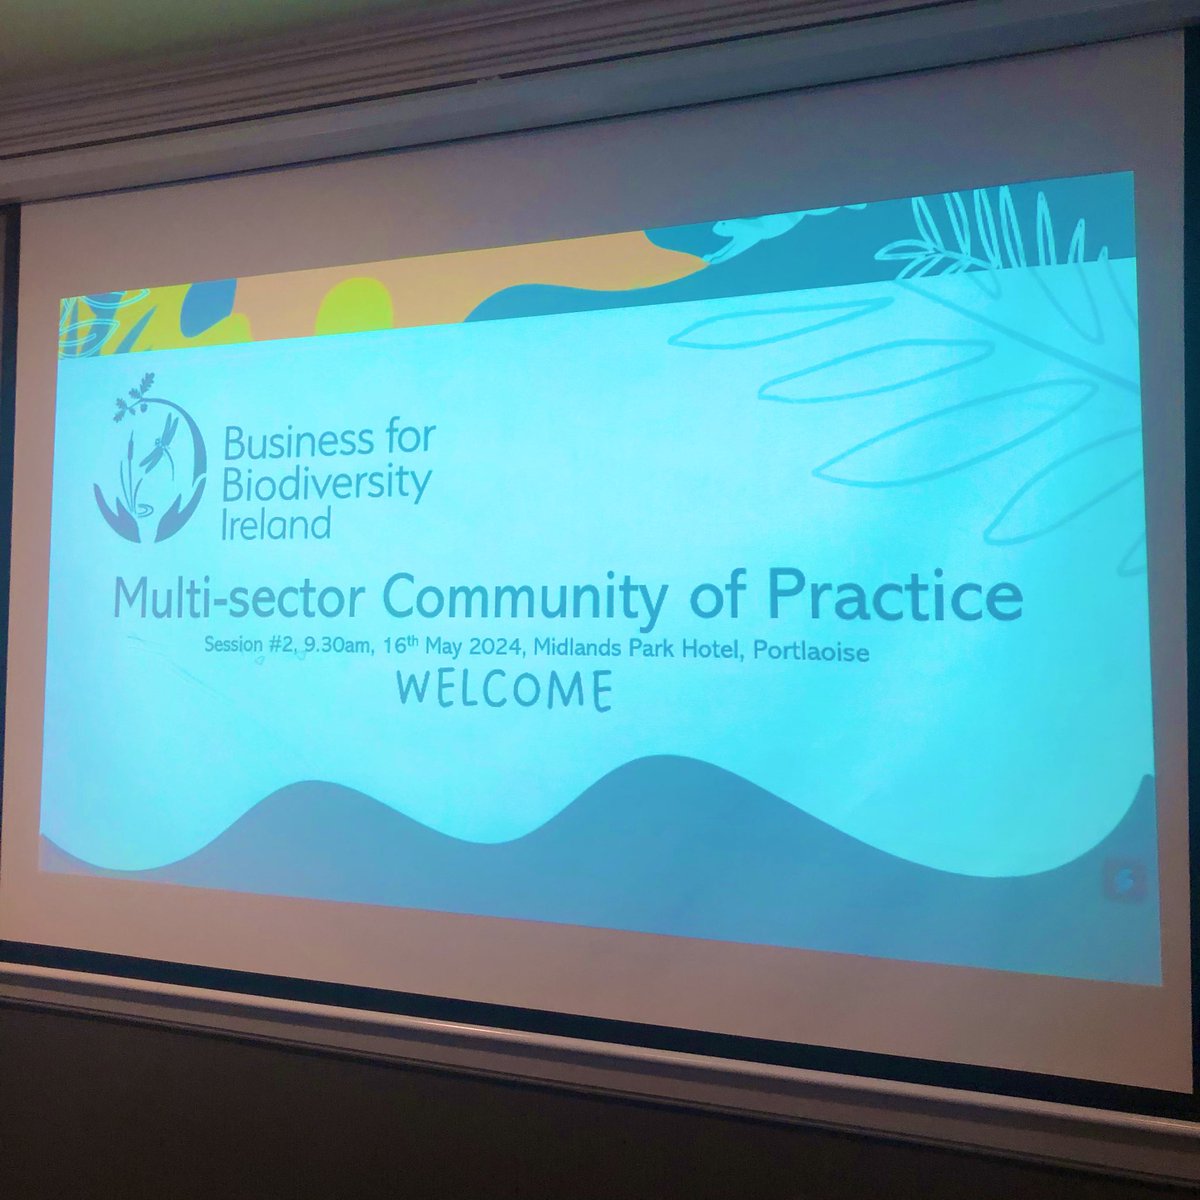 Thanks to our Community of Practice businesses for joining us for an enlightening workshop on how they are approaching #StakeholderEngagement and #Materiality assessments when it comes to reporting on business impacts and dependencies on #nature at our Multi-sector #BizBioCoP